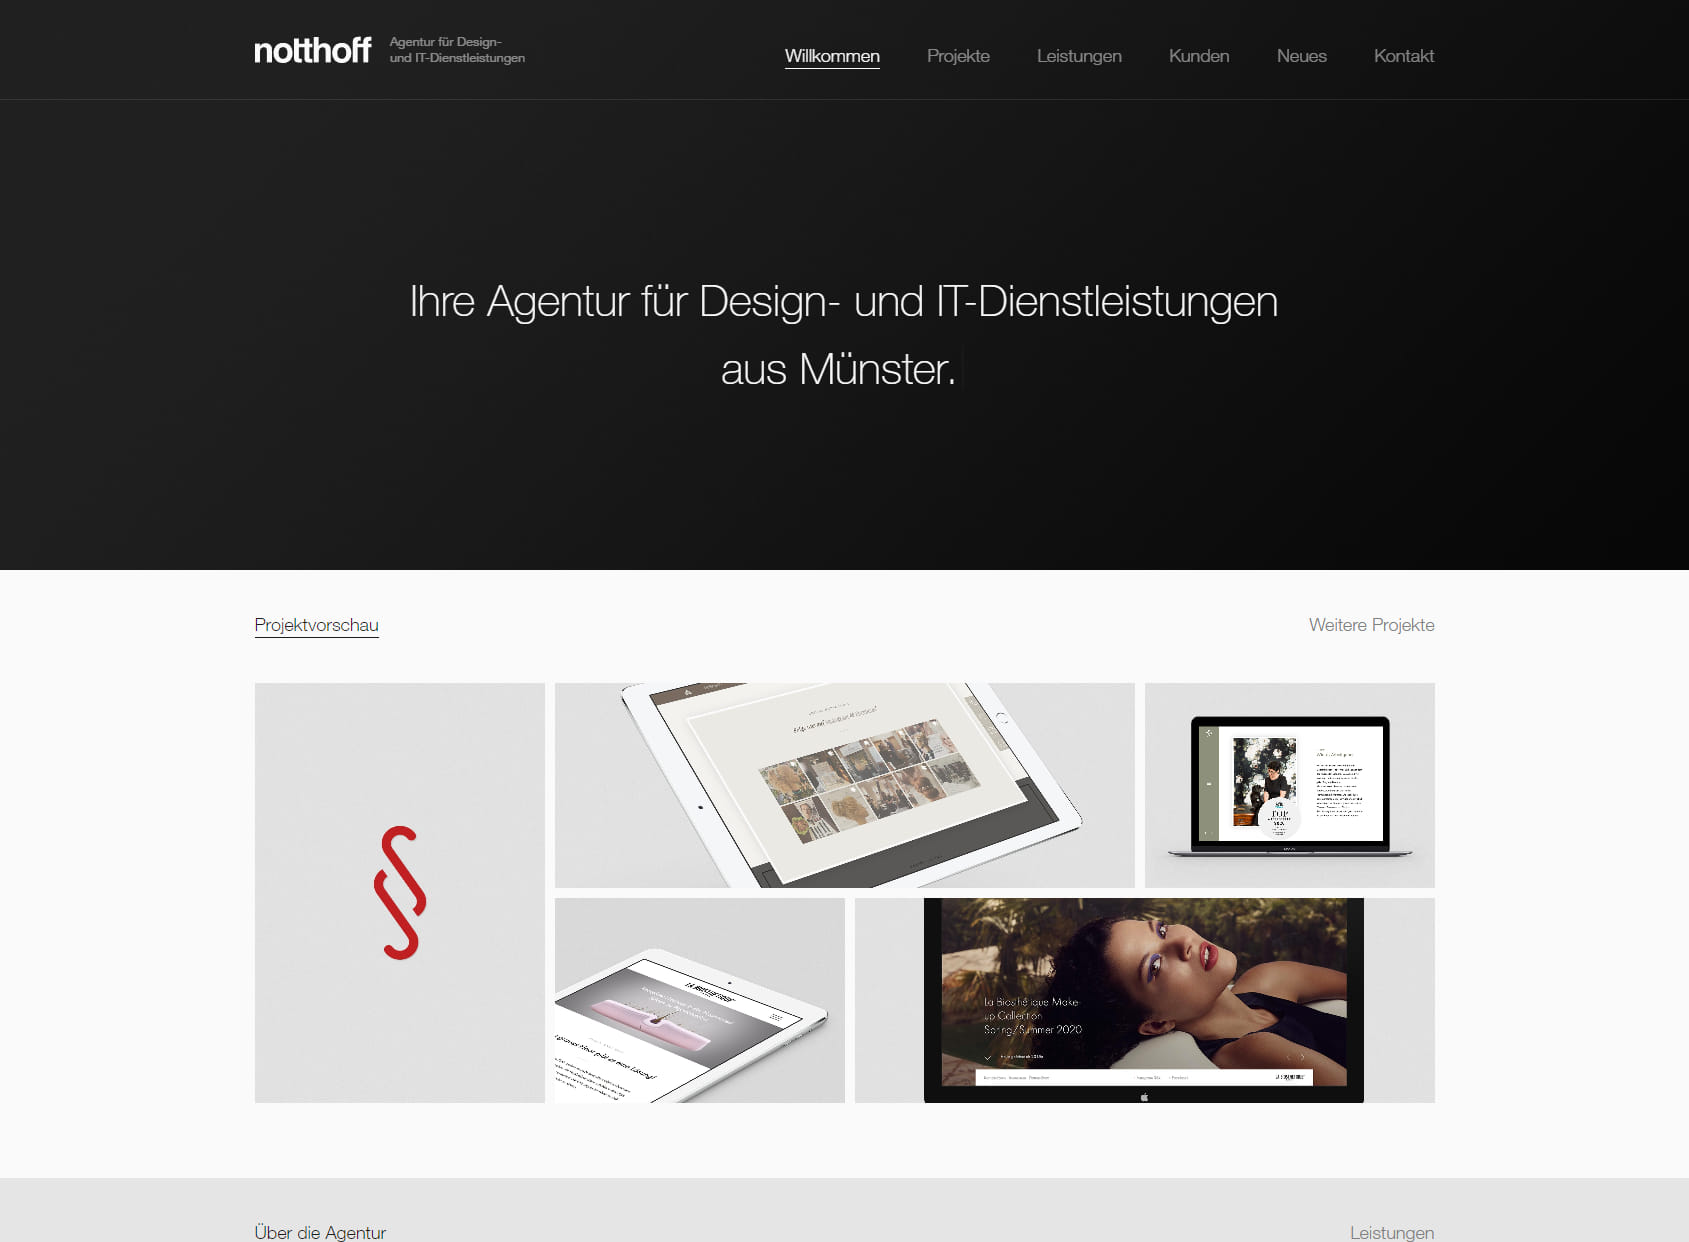 notthoff GmbH - Agency for Design and IT Services